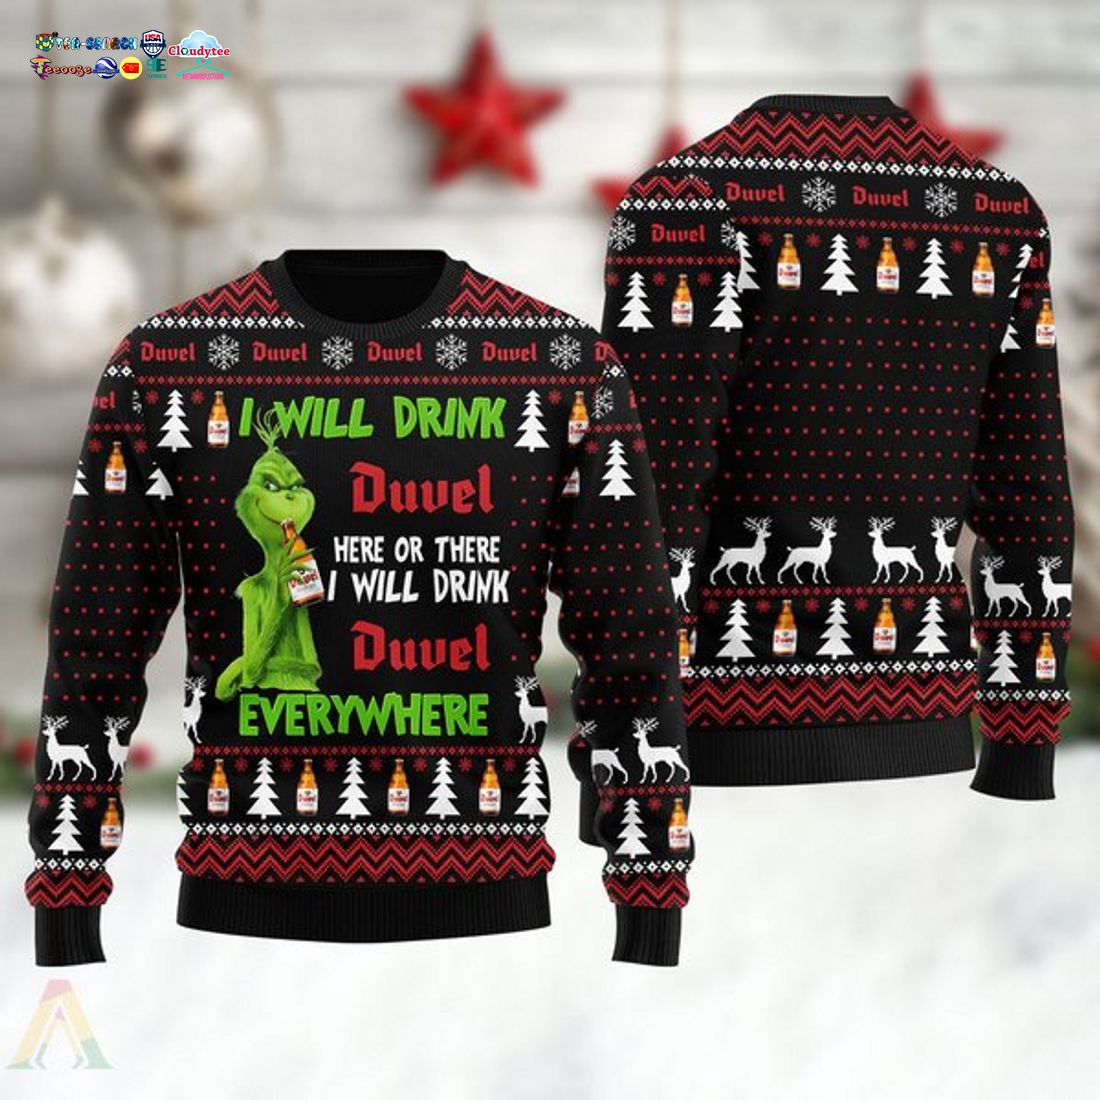 Grinch I Will Drink Duvel Everywhere Ugly Christmas Sweater - Stand easy bro